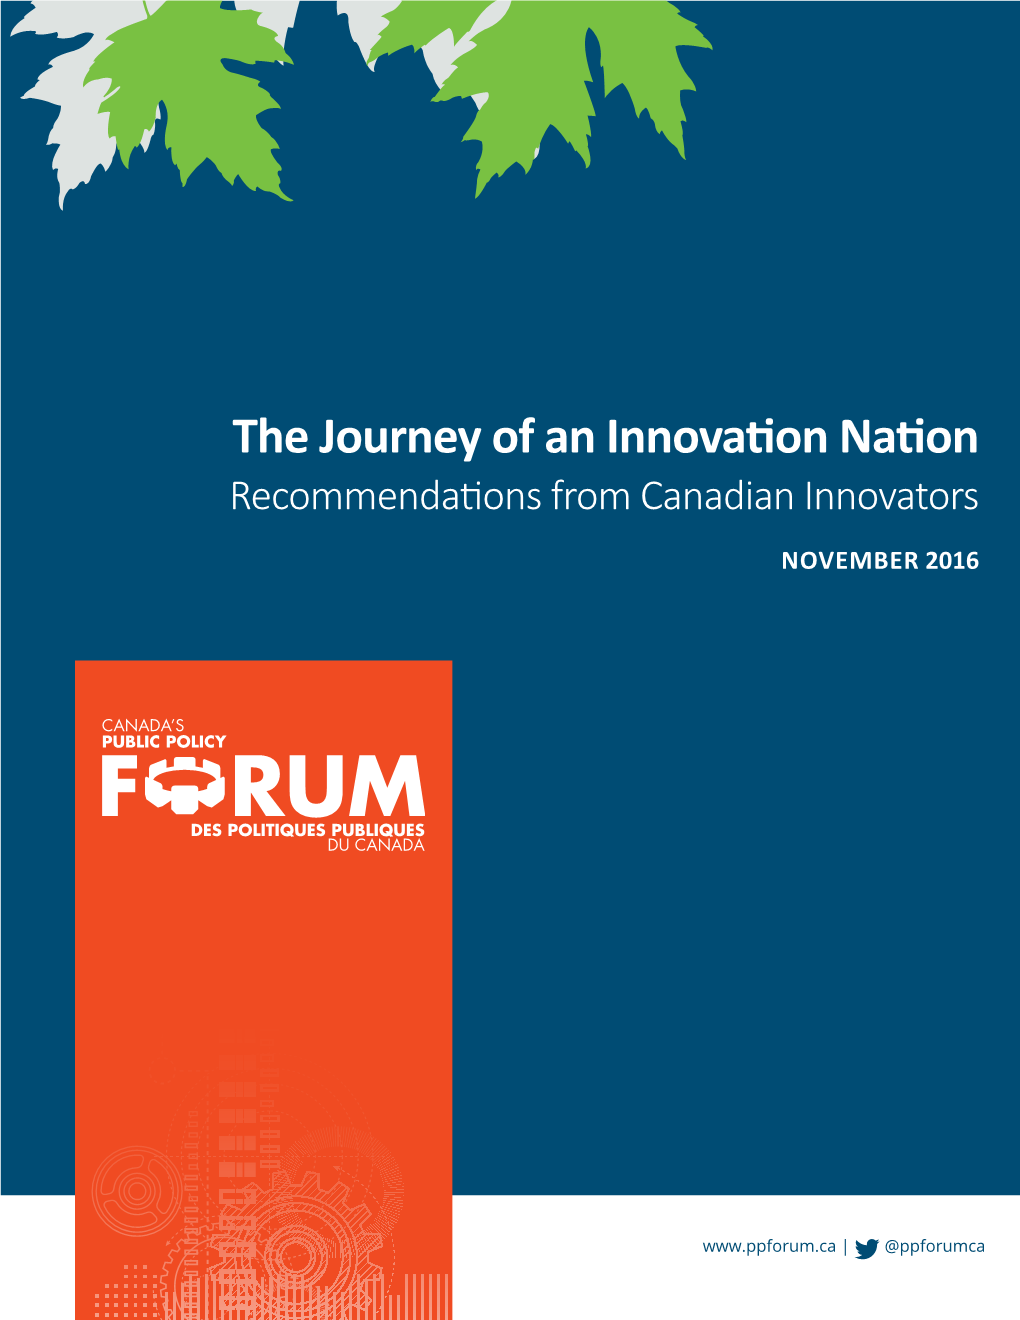 Recommendations from Canadian Innovators